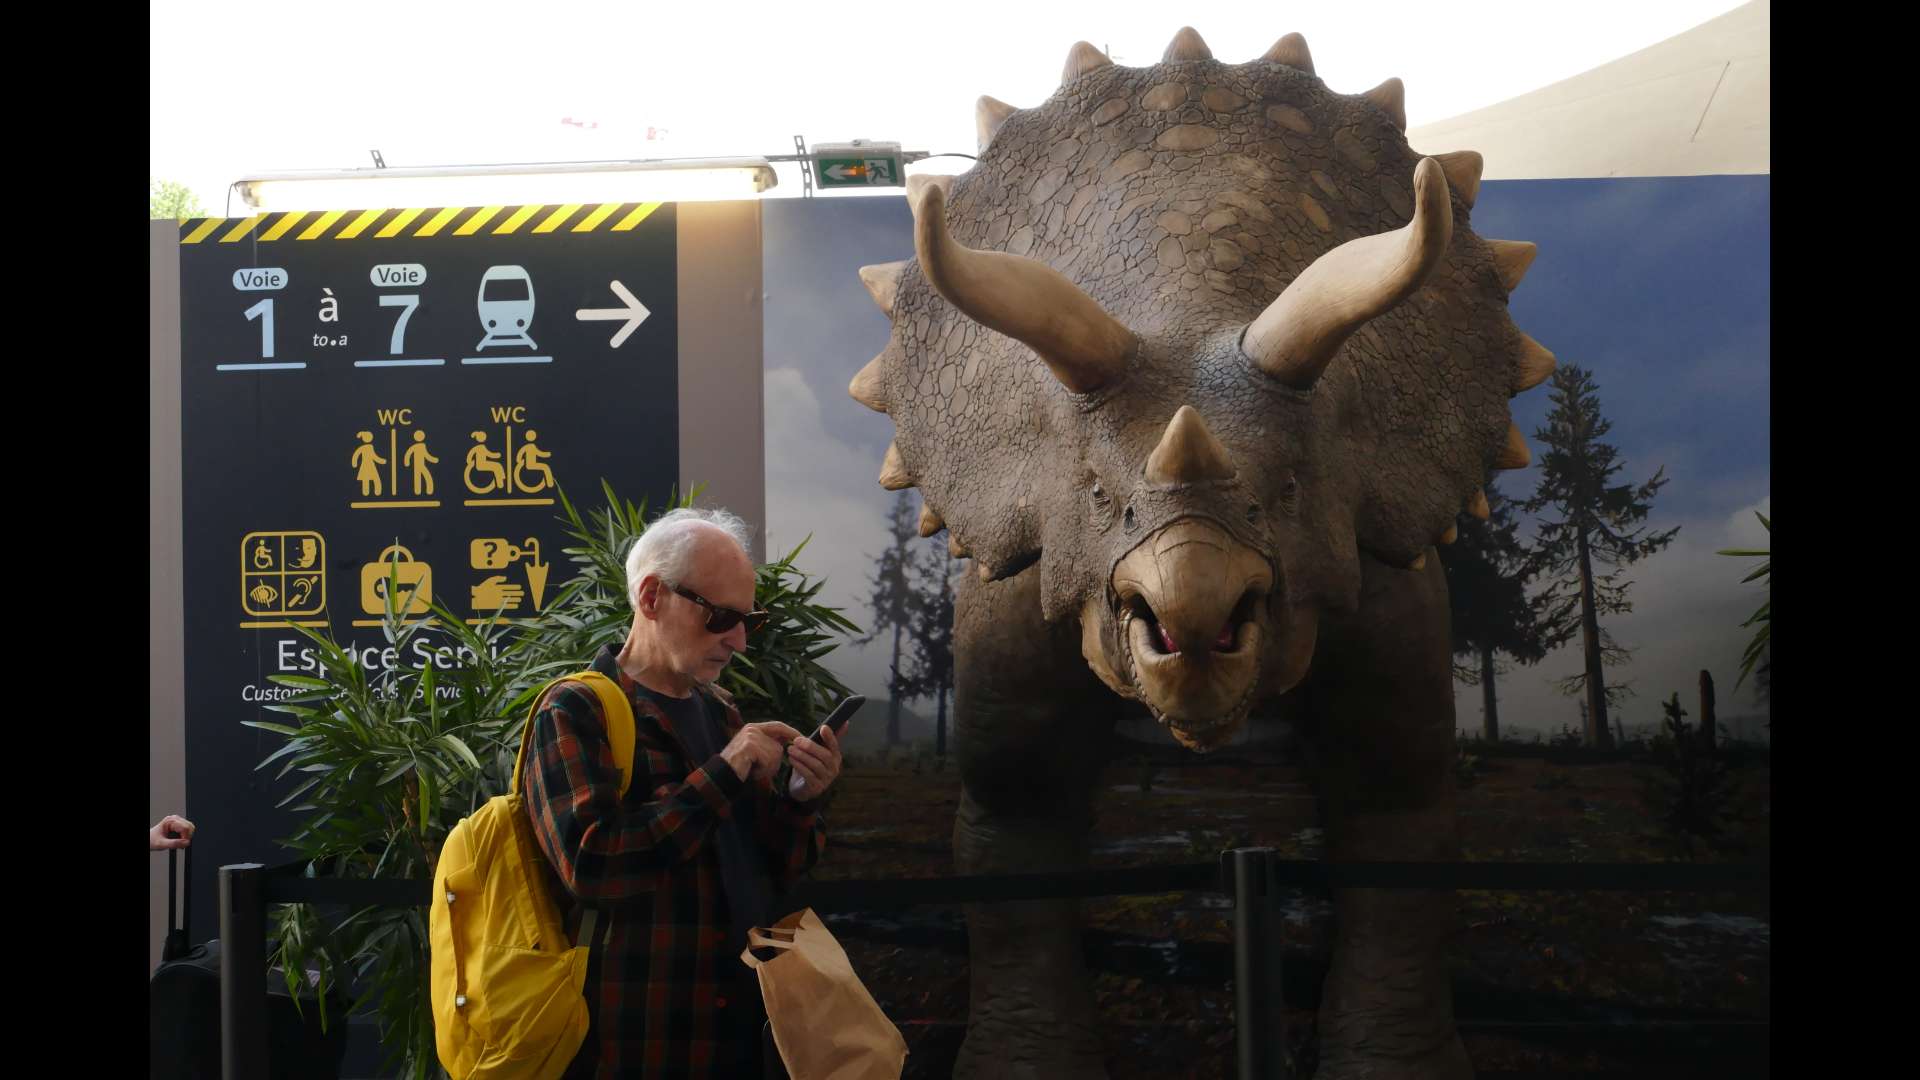 An exhibition organised in 2018 at the Gare d’Austerlitz in Paris by the French National Museum of Natural History. « À la découverte de la paléontologie, du plus petit des microfossiles au plus grand des dinosaures » (Discovering palaeontology. From the tiniest microfossils to the largest dinosaurs).  Photo copyright: Sophie Cattoire